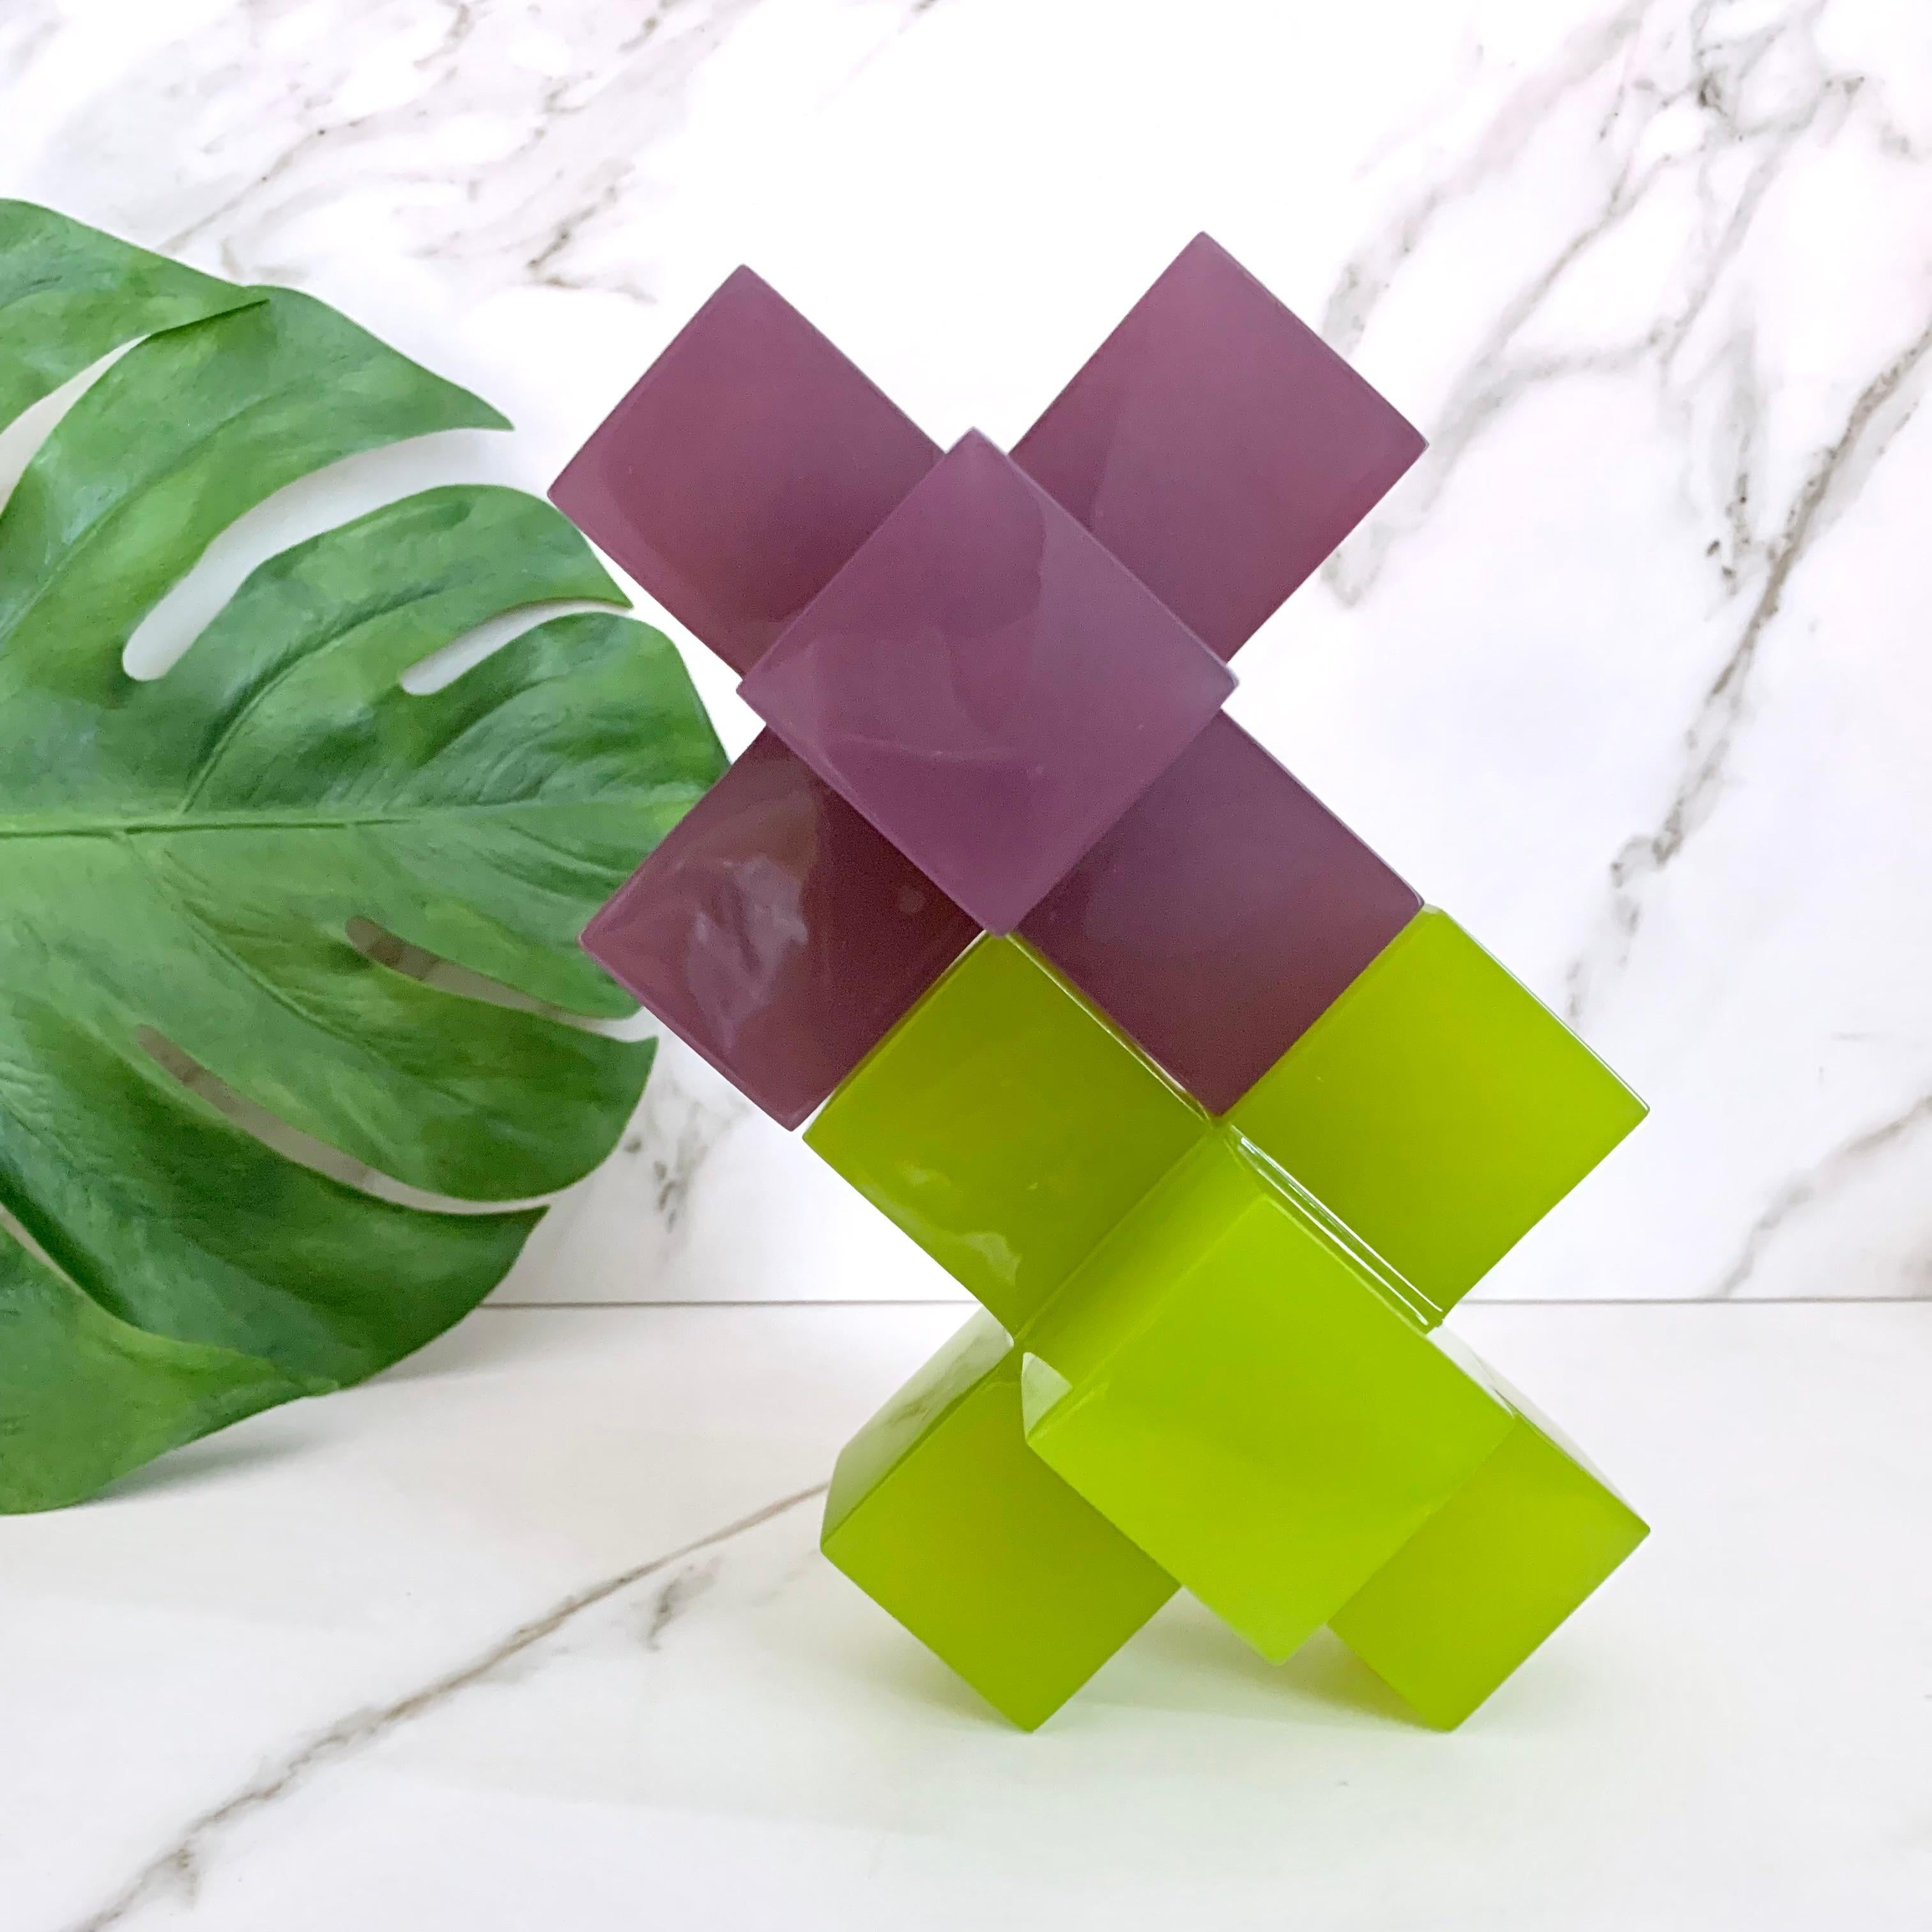 Mexican Geometric Sculpture in Polished Lime Green Resin by Paola Valle For Sale